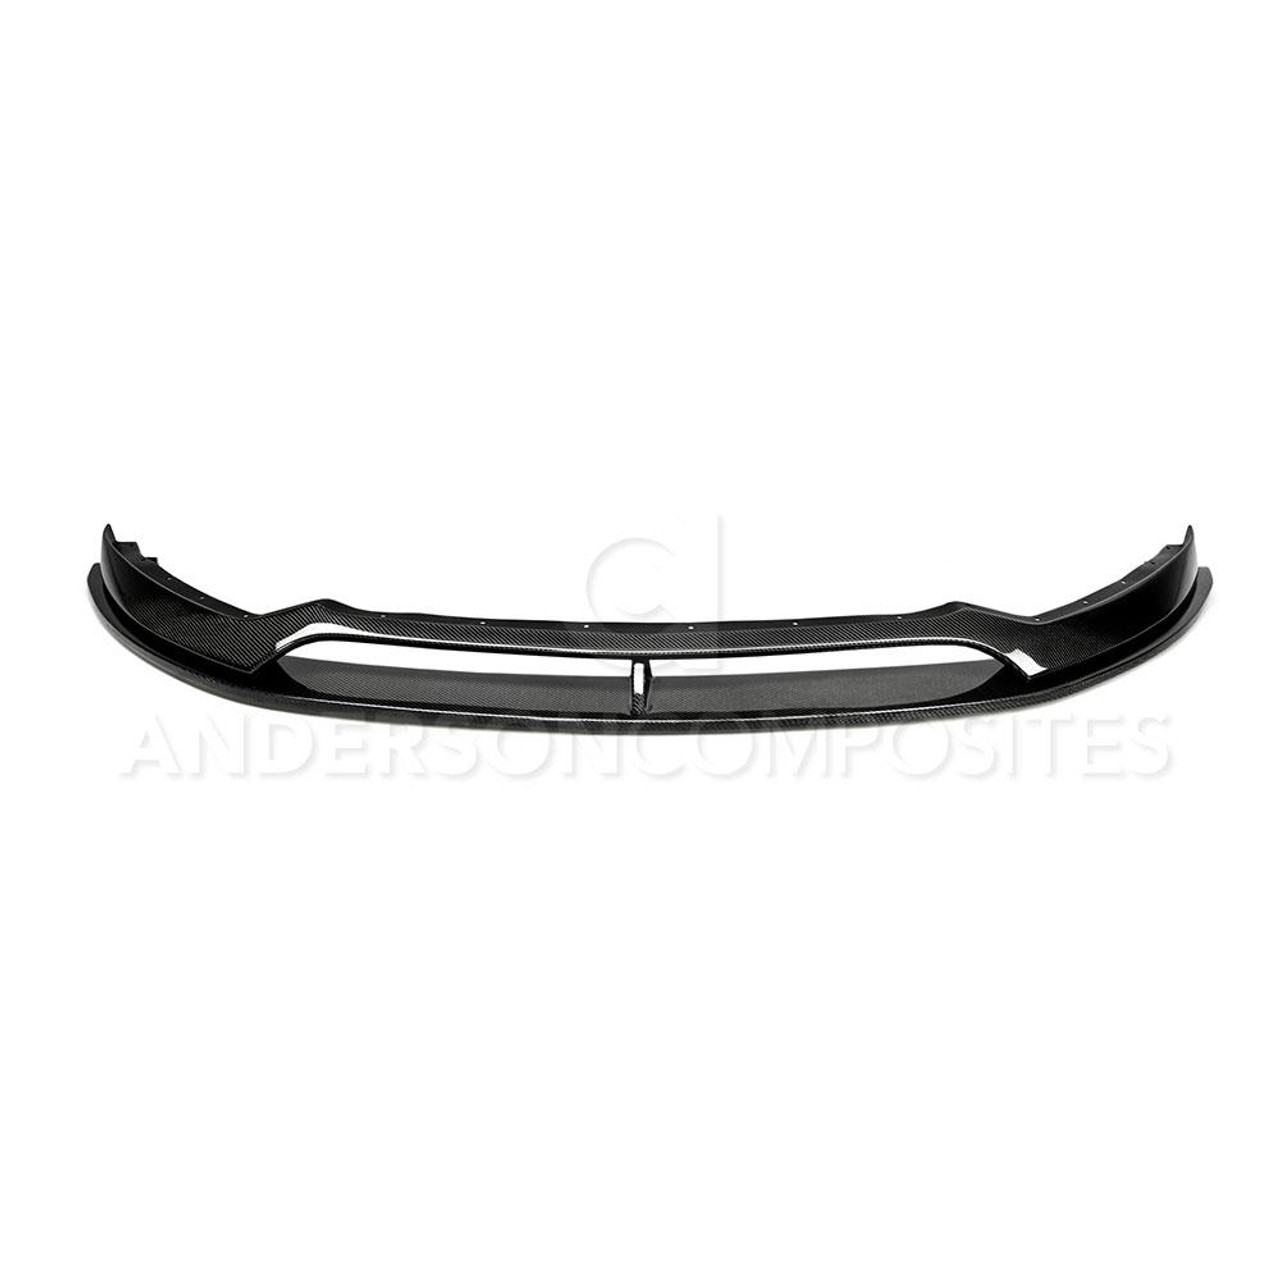 Anderson Composites 2015 - 2017 Mustang Carbon Fiber Type-AR Front Chin Splitter